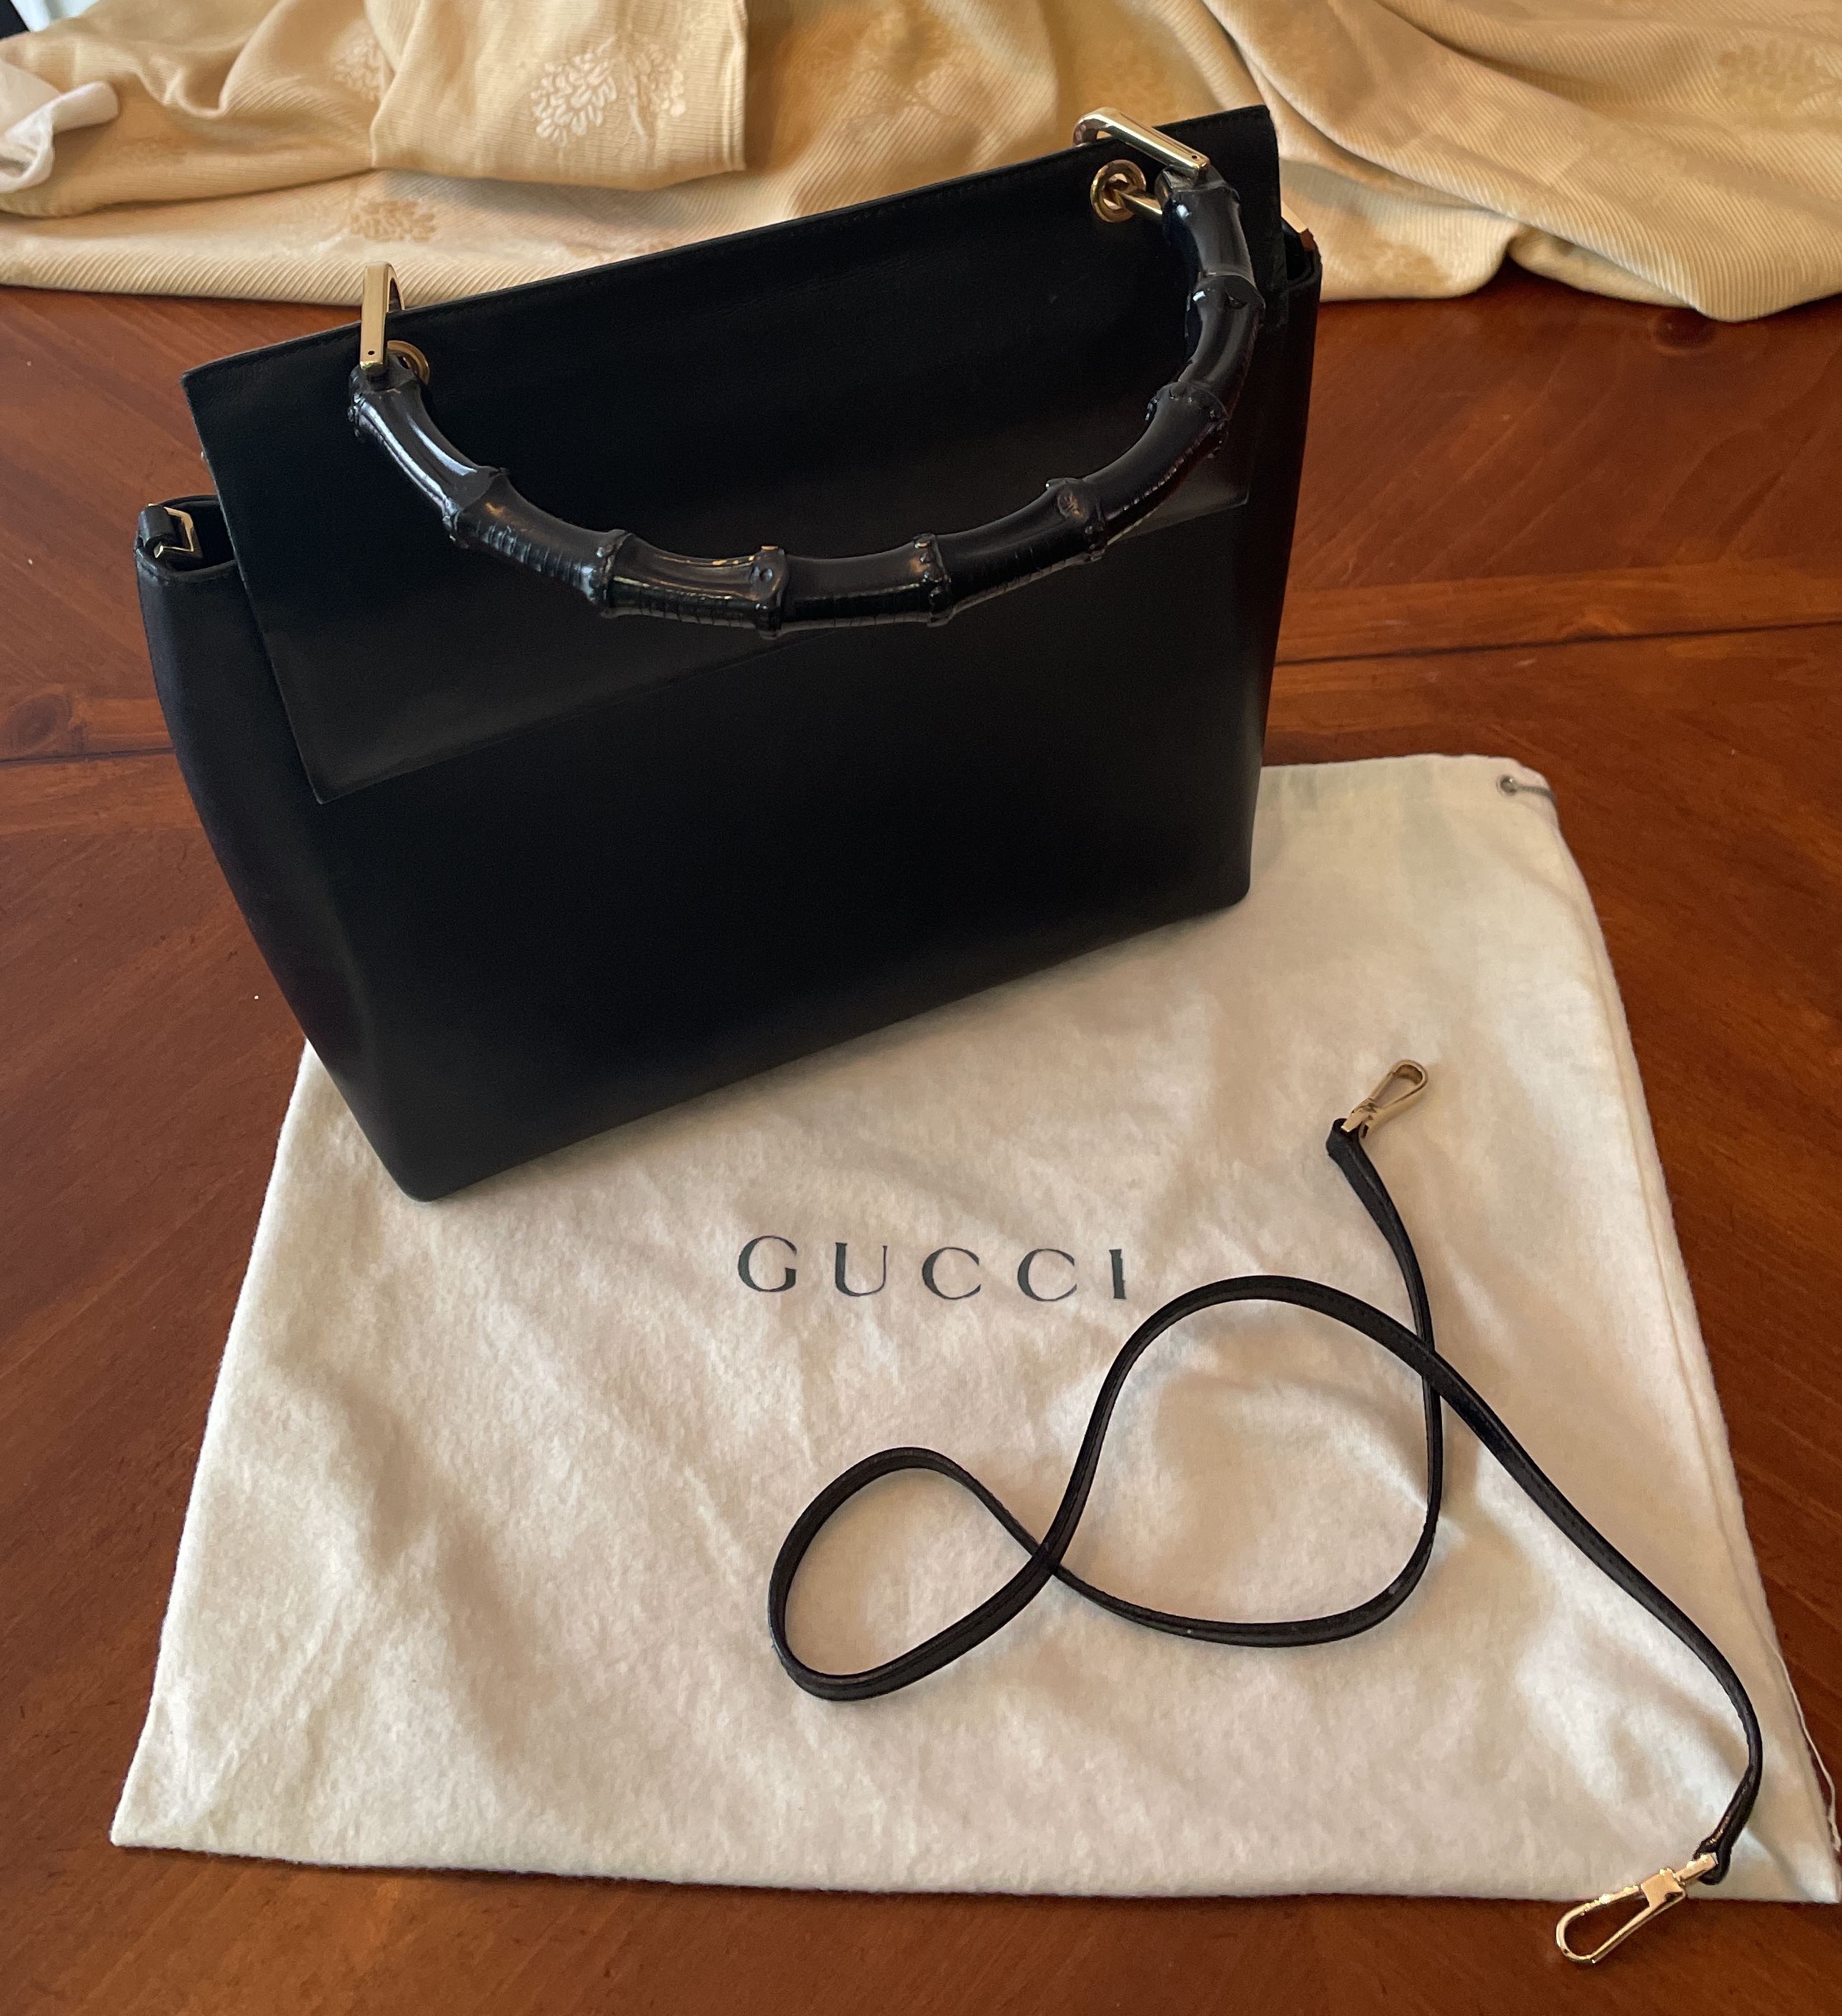 Vintage Gucci Leather Handbag with Carved Wood Handle - Raleigh